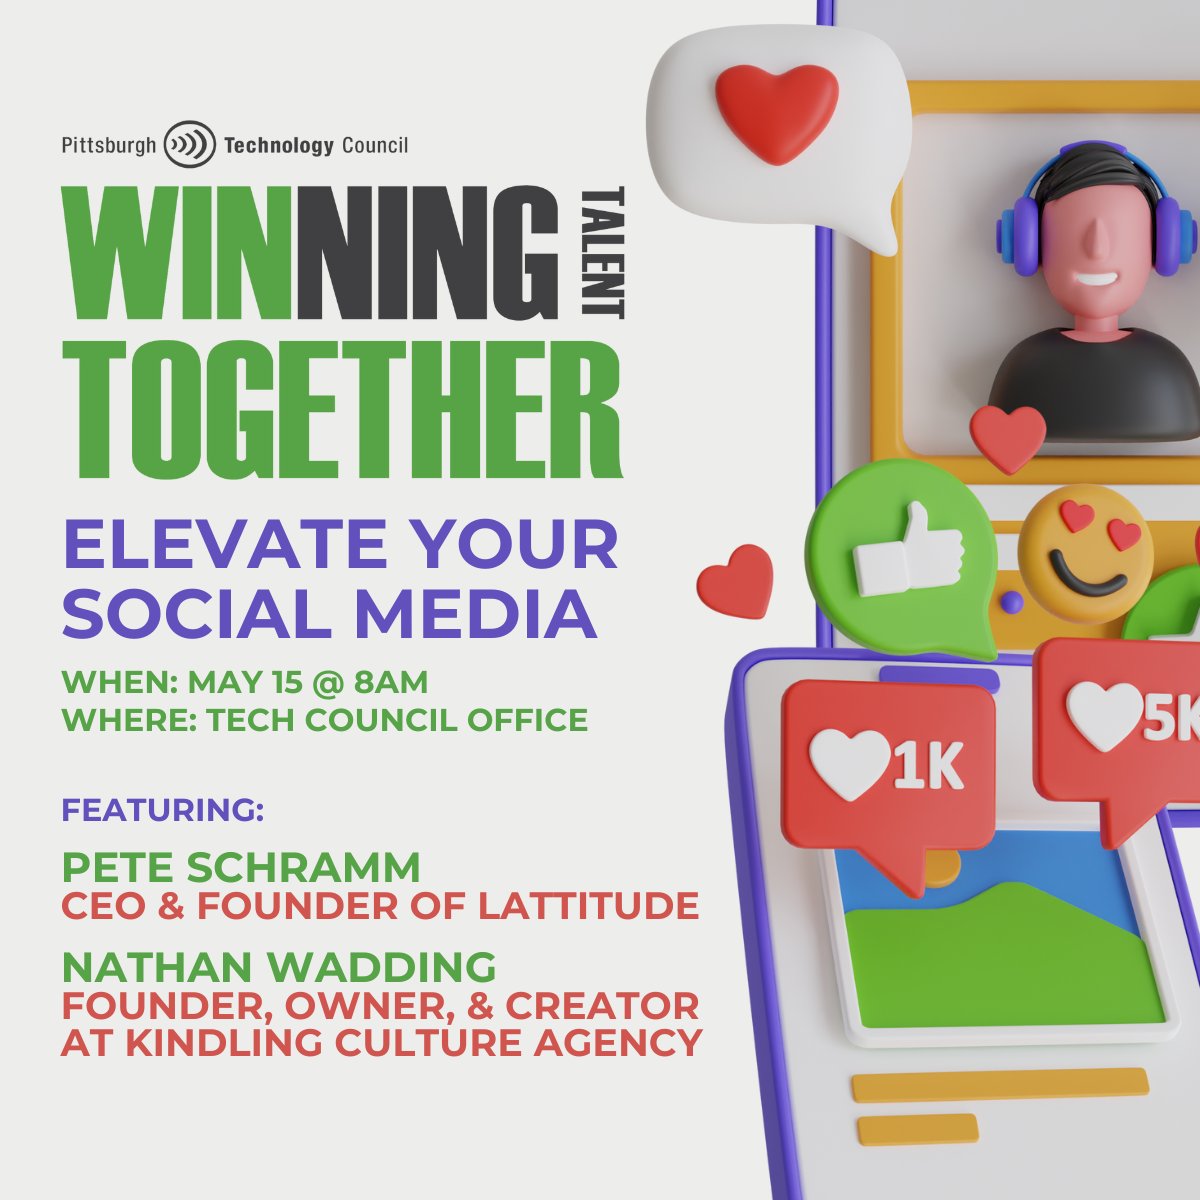 Want to learn how to target a professional mindset and grow your company’s presence on LinkedIn and other social media platforms? Attend our upcoming Winning Talent Together Workshop! pghtech.org/events/WTT_Soc…